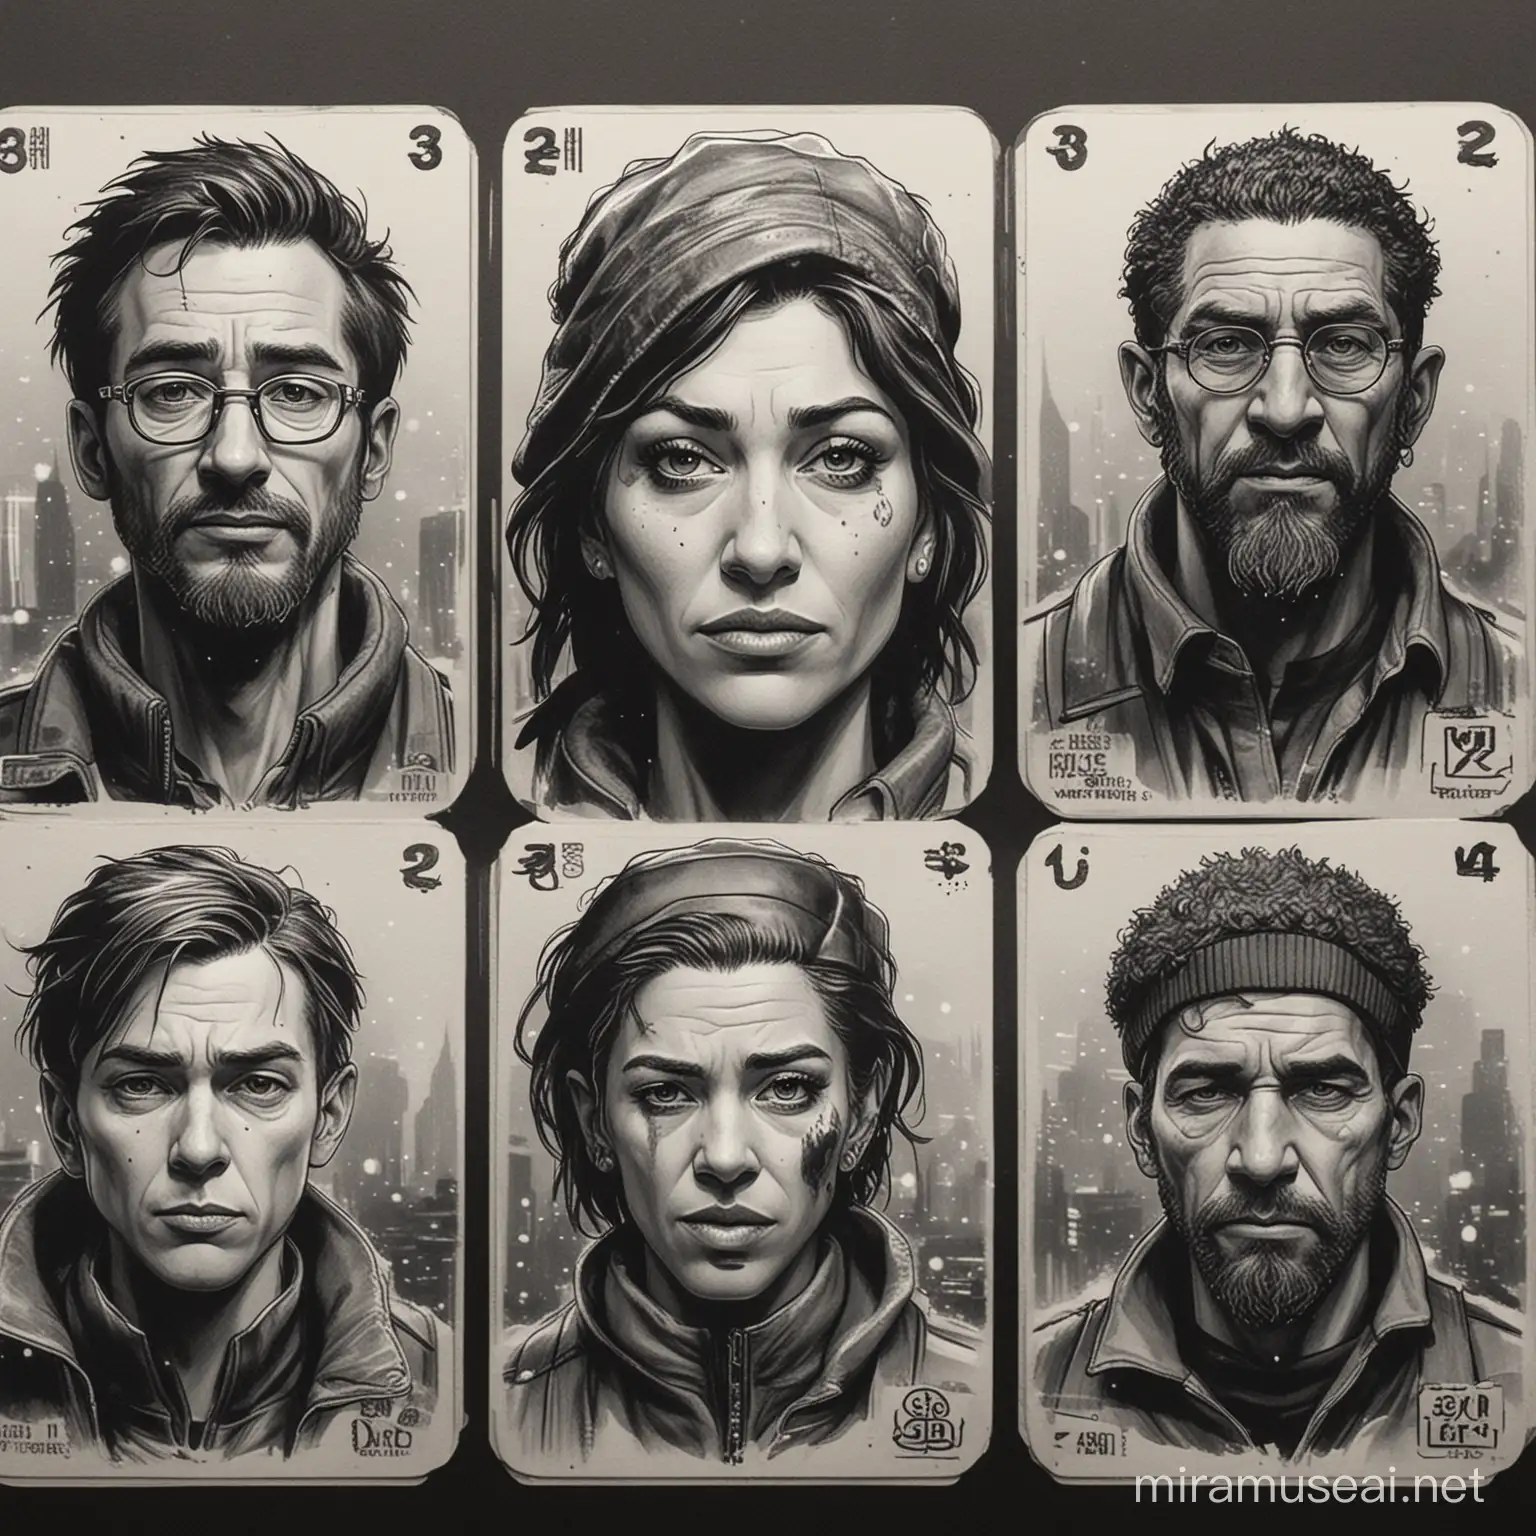 create 8 tokens inspired in characters from the snowpiercer comics